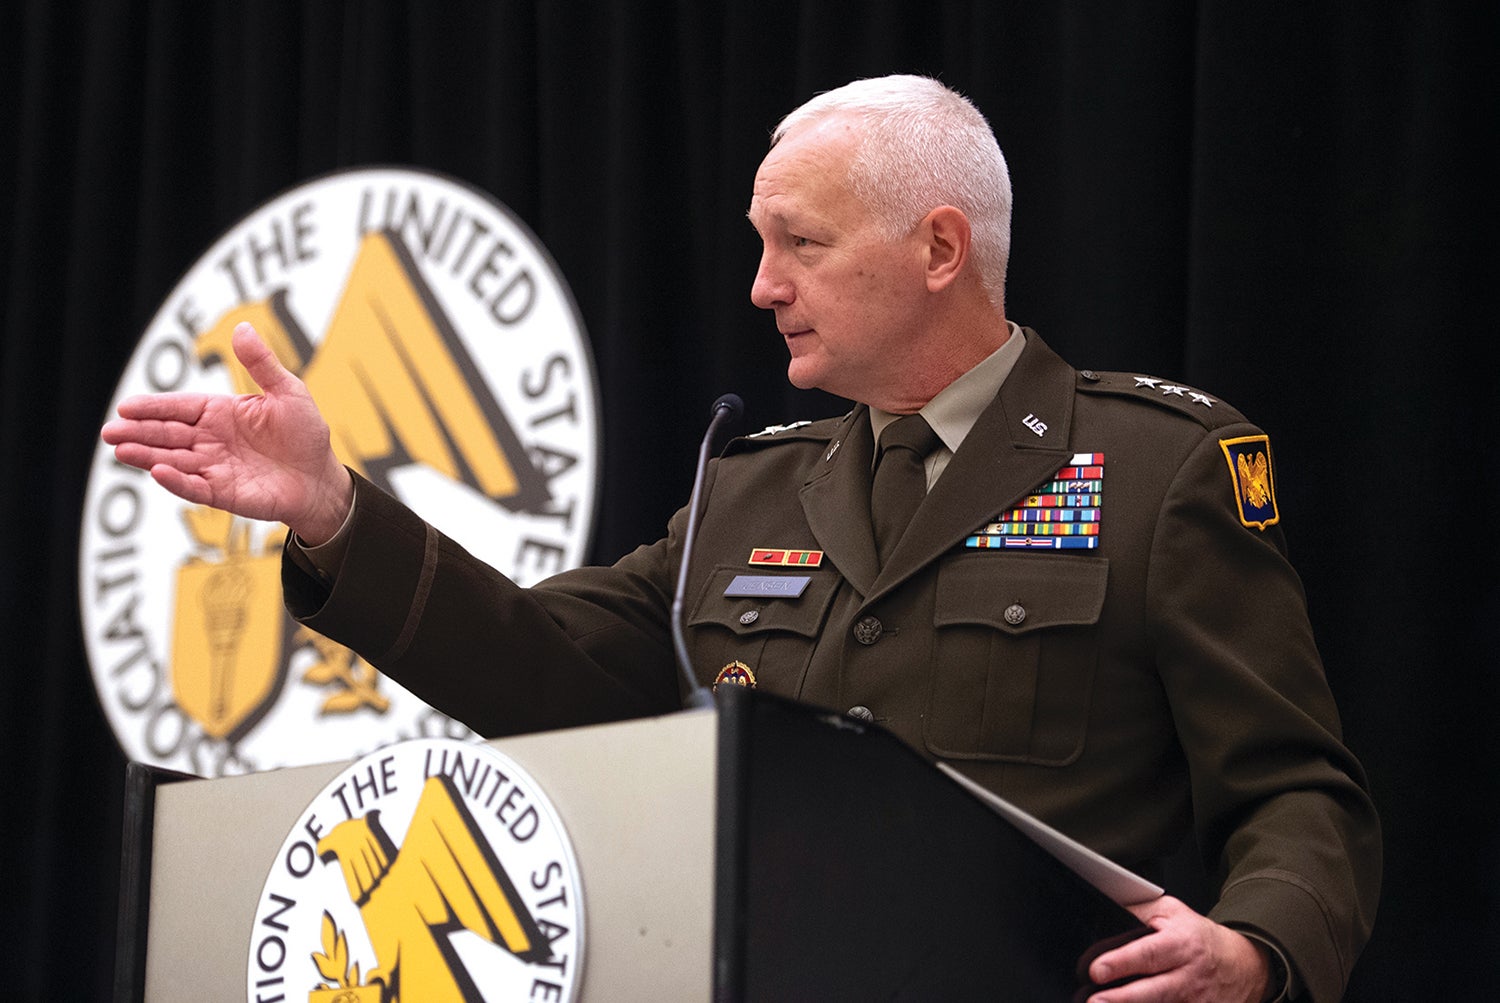 Army National Guard Director Lt. Gen. Jon Jensen speaks at a breakfast during the Association of the U.S. Army 2022 Annual Meeting and Exposition in Washington, D.C. (Credit: AUSA/Rod Lamkey)